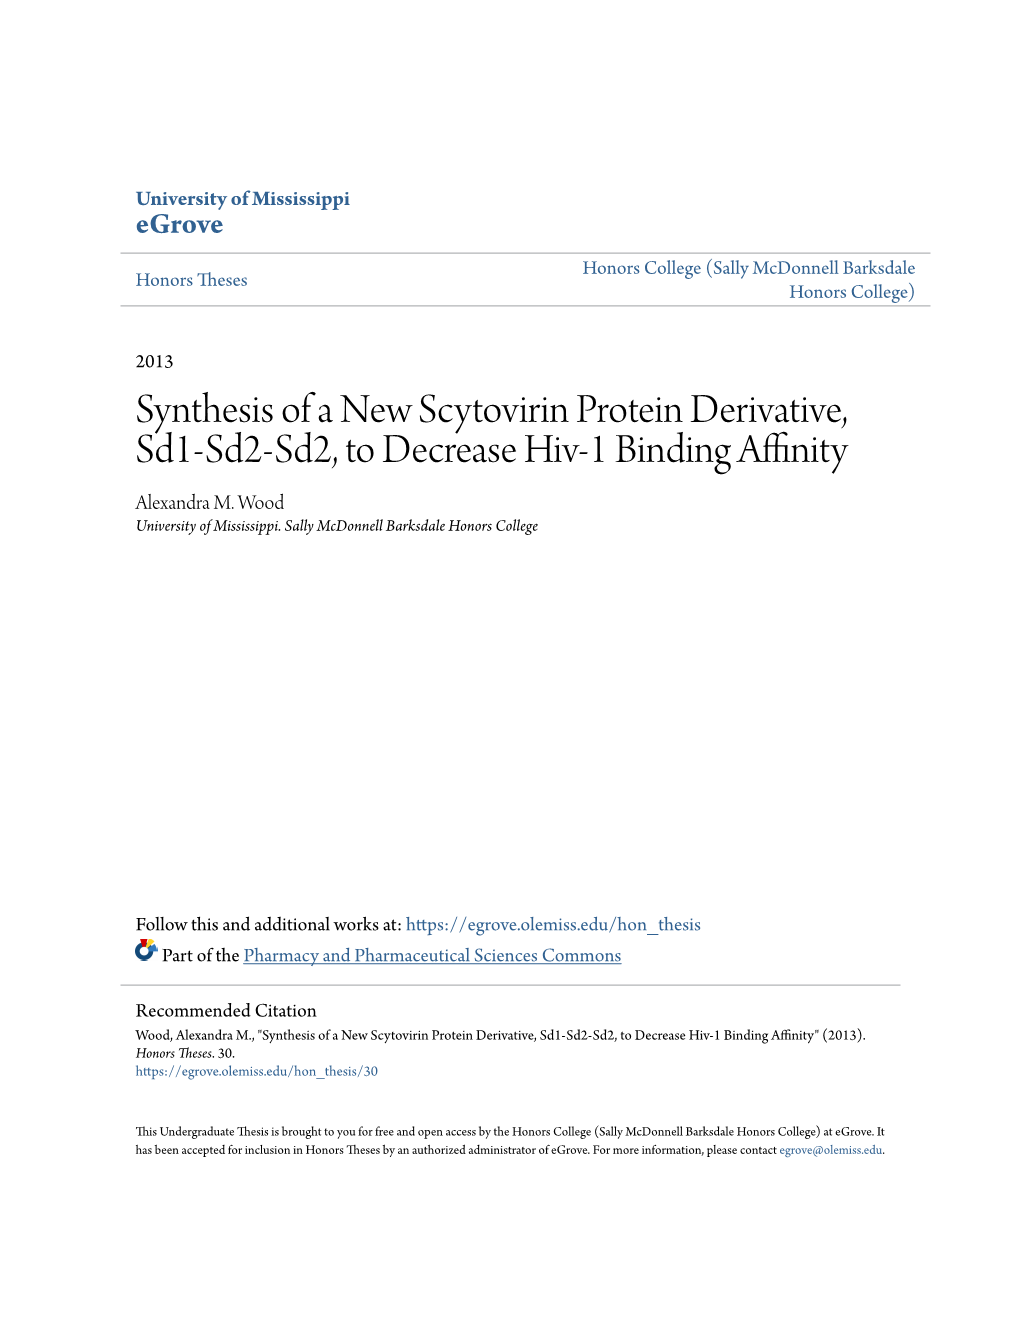 Synthesis of a New Scytovirin Protein Derivative, Sd1-Sd2-Sd2, to Decrease Hiv-1 Binding Affinity Alexandra M